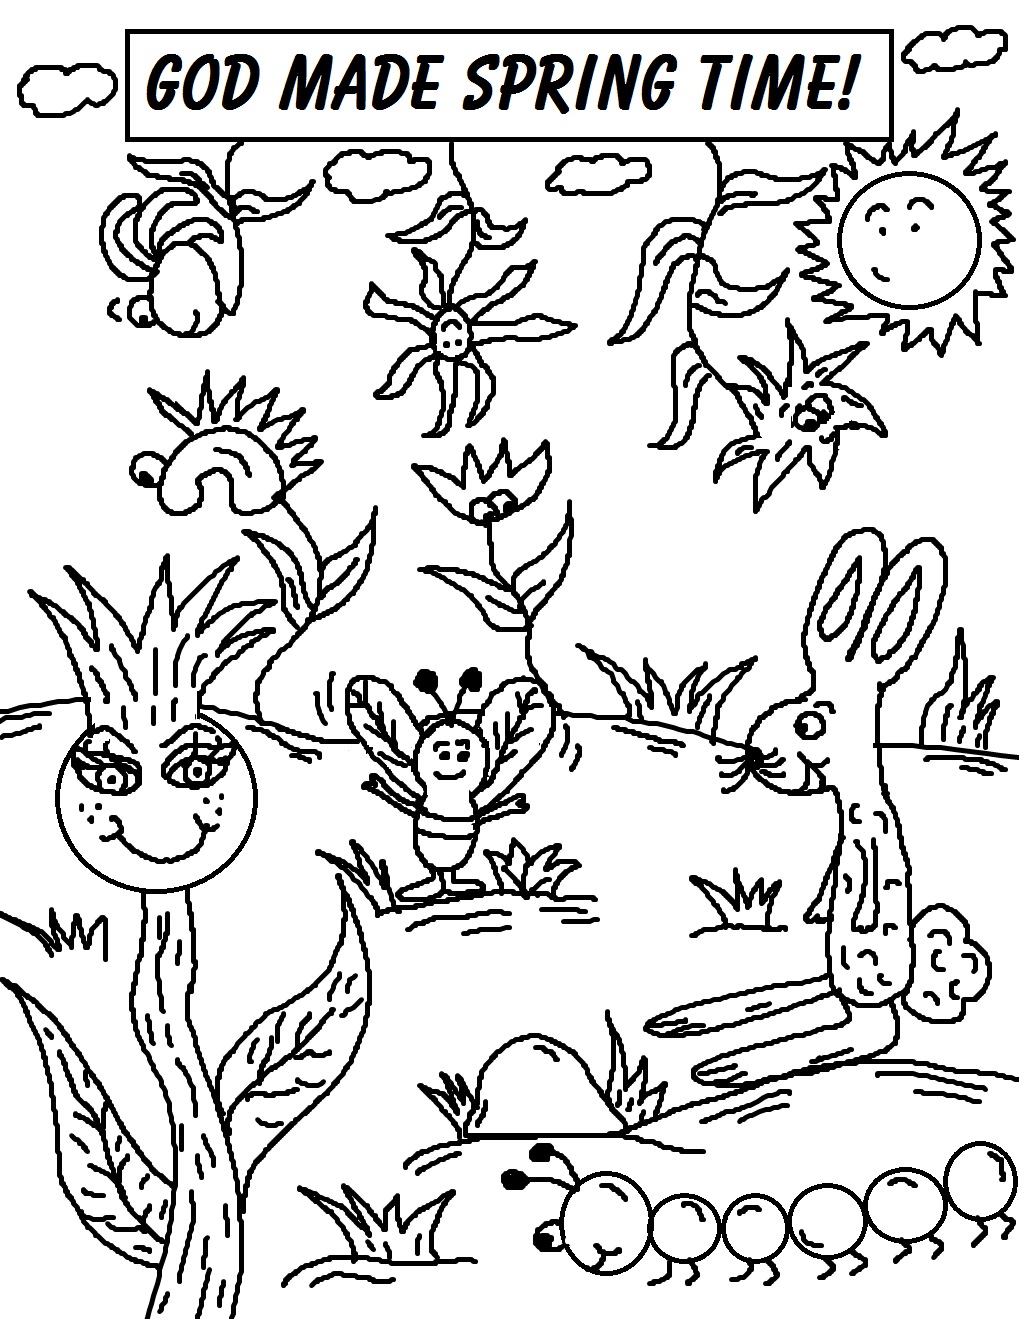  Spring Coloring Pages GOD MADE SPRING TIME!